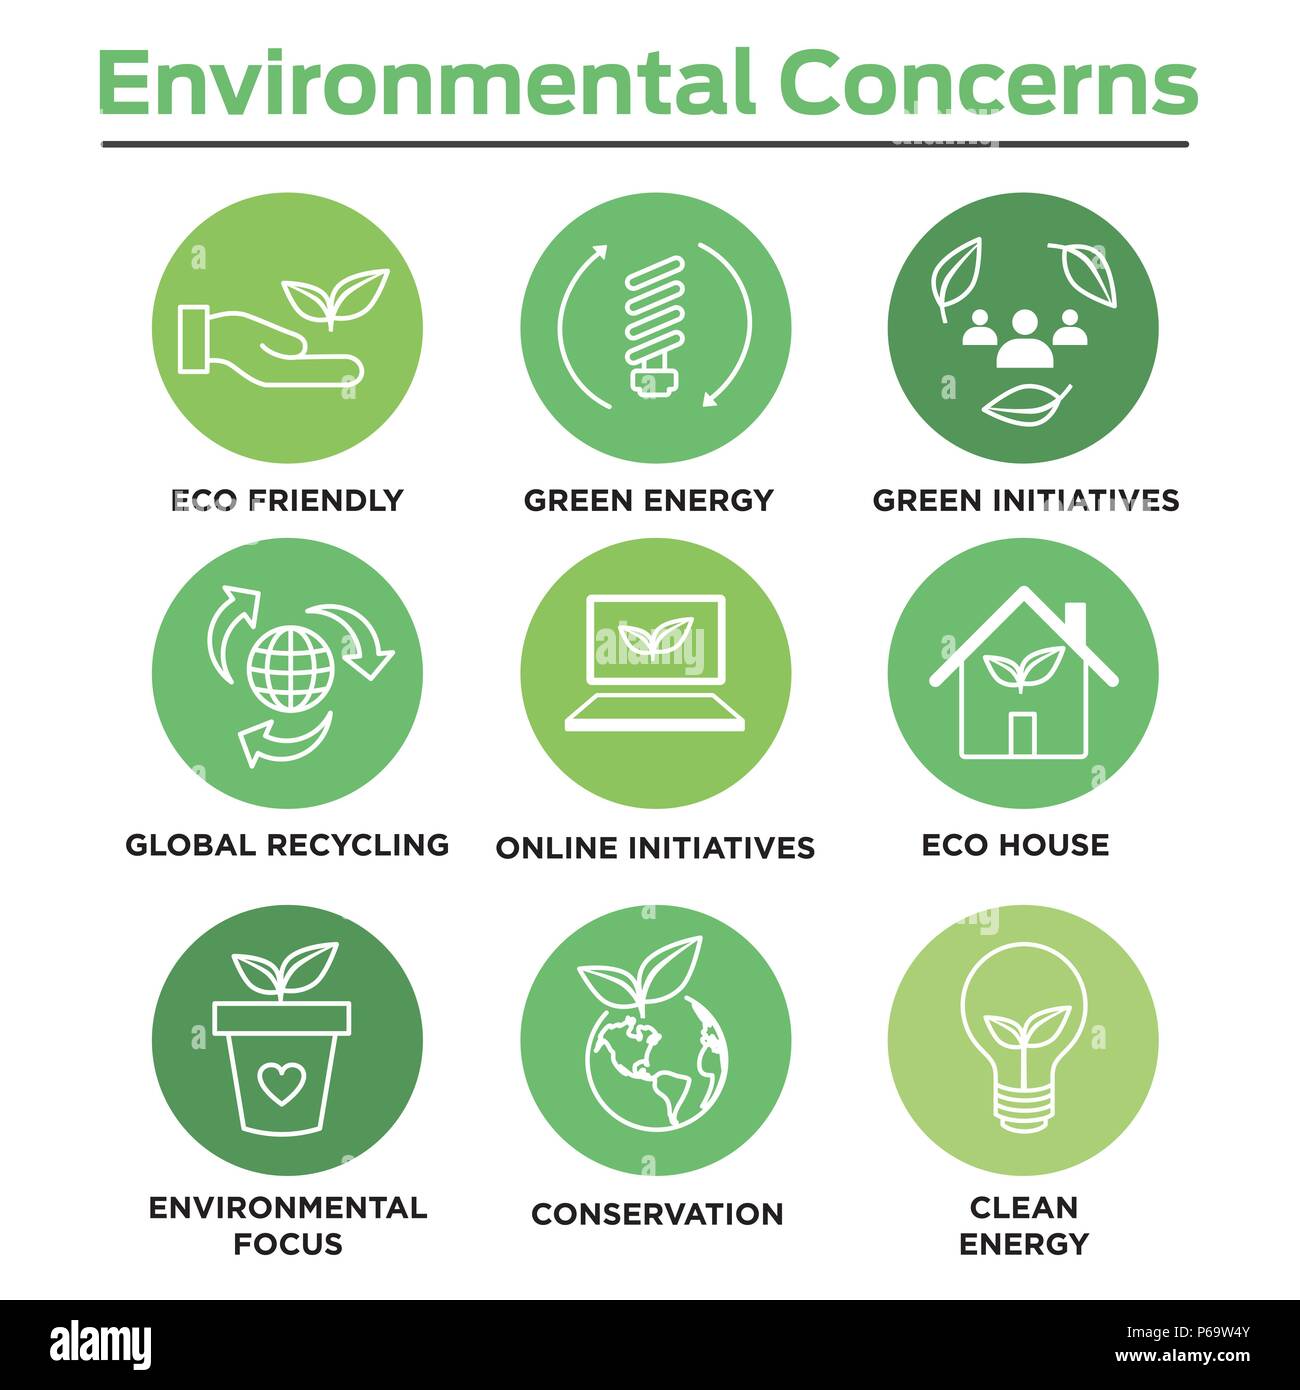 Environmental concerns icon set with lightbulb, hand holding leaf, recycling, etc. Stock Vector